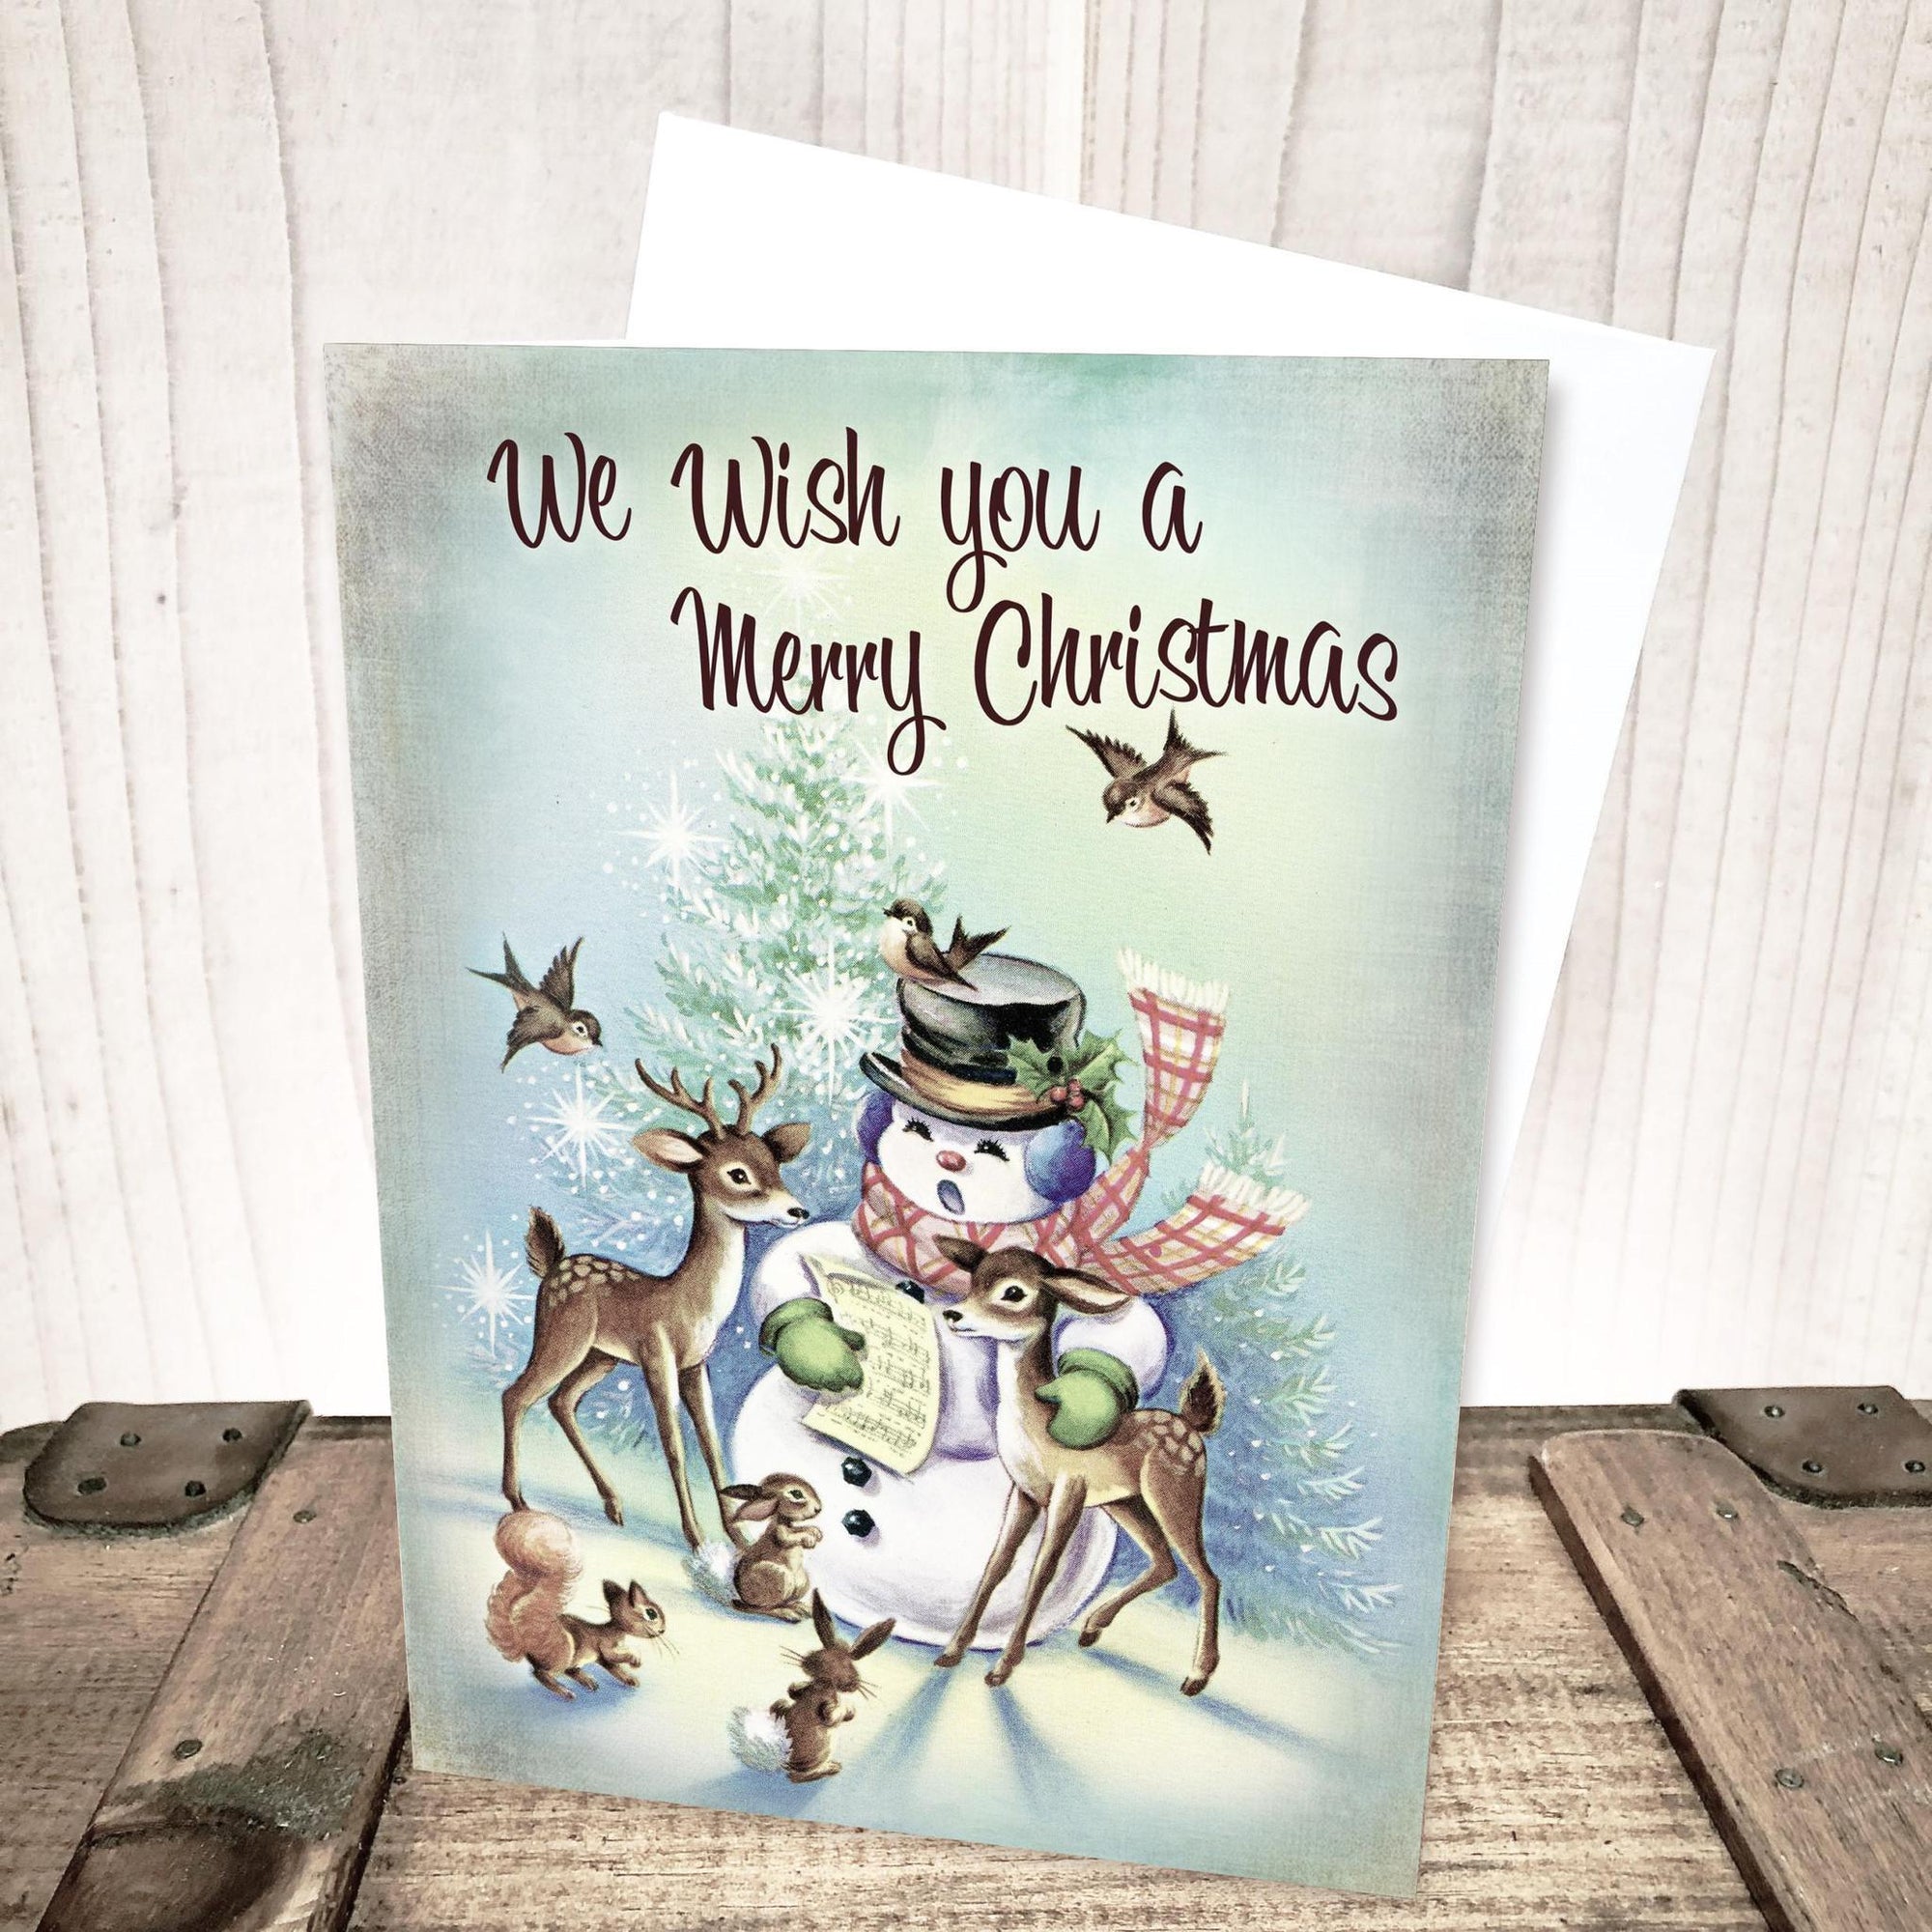 Retro Snowman and Deer Christmas Card by Yesterday's Best